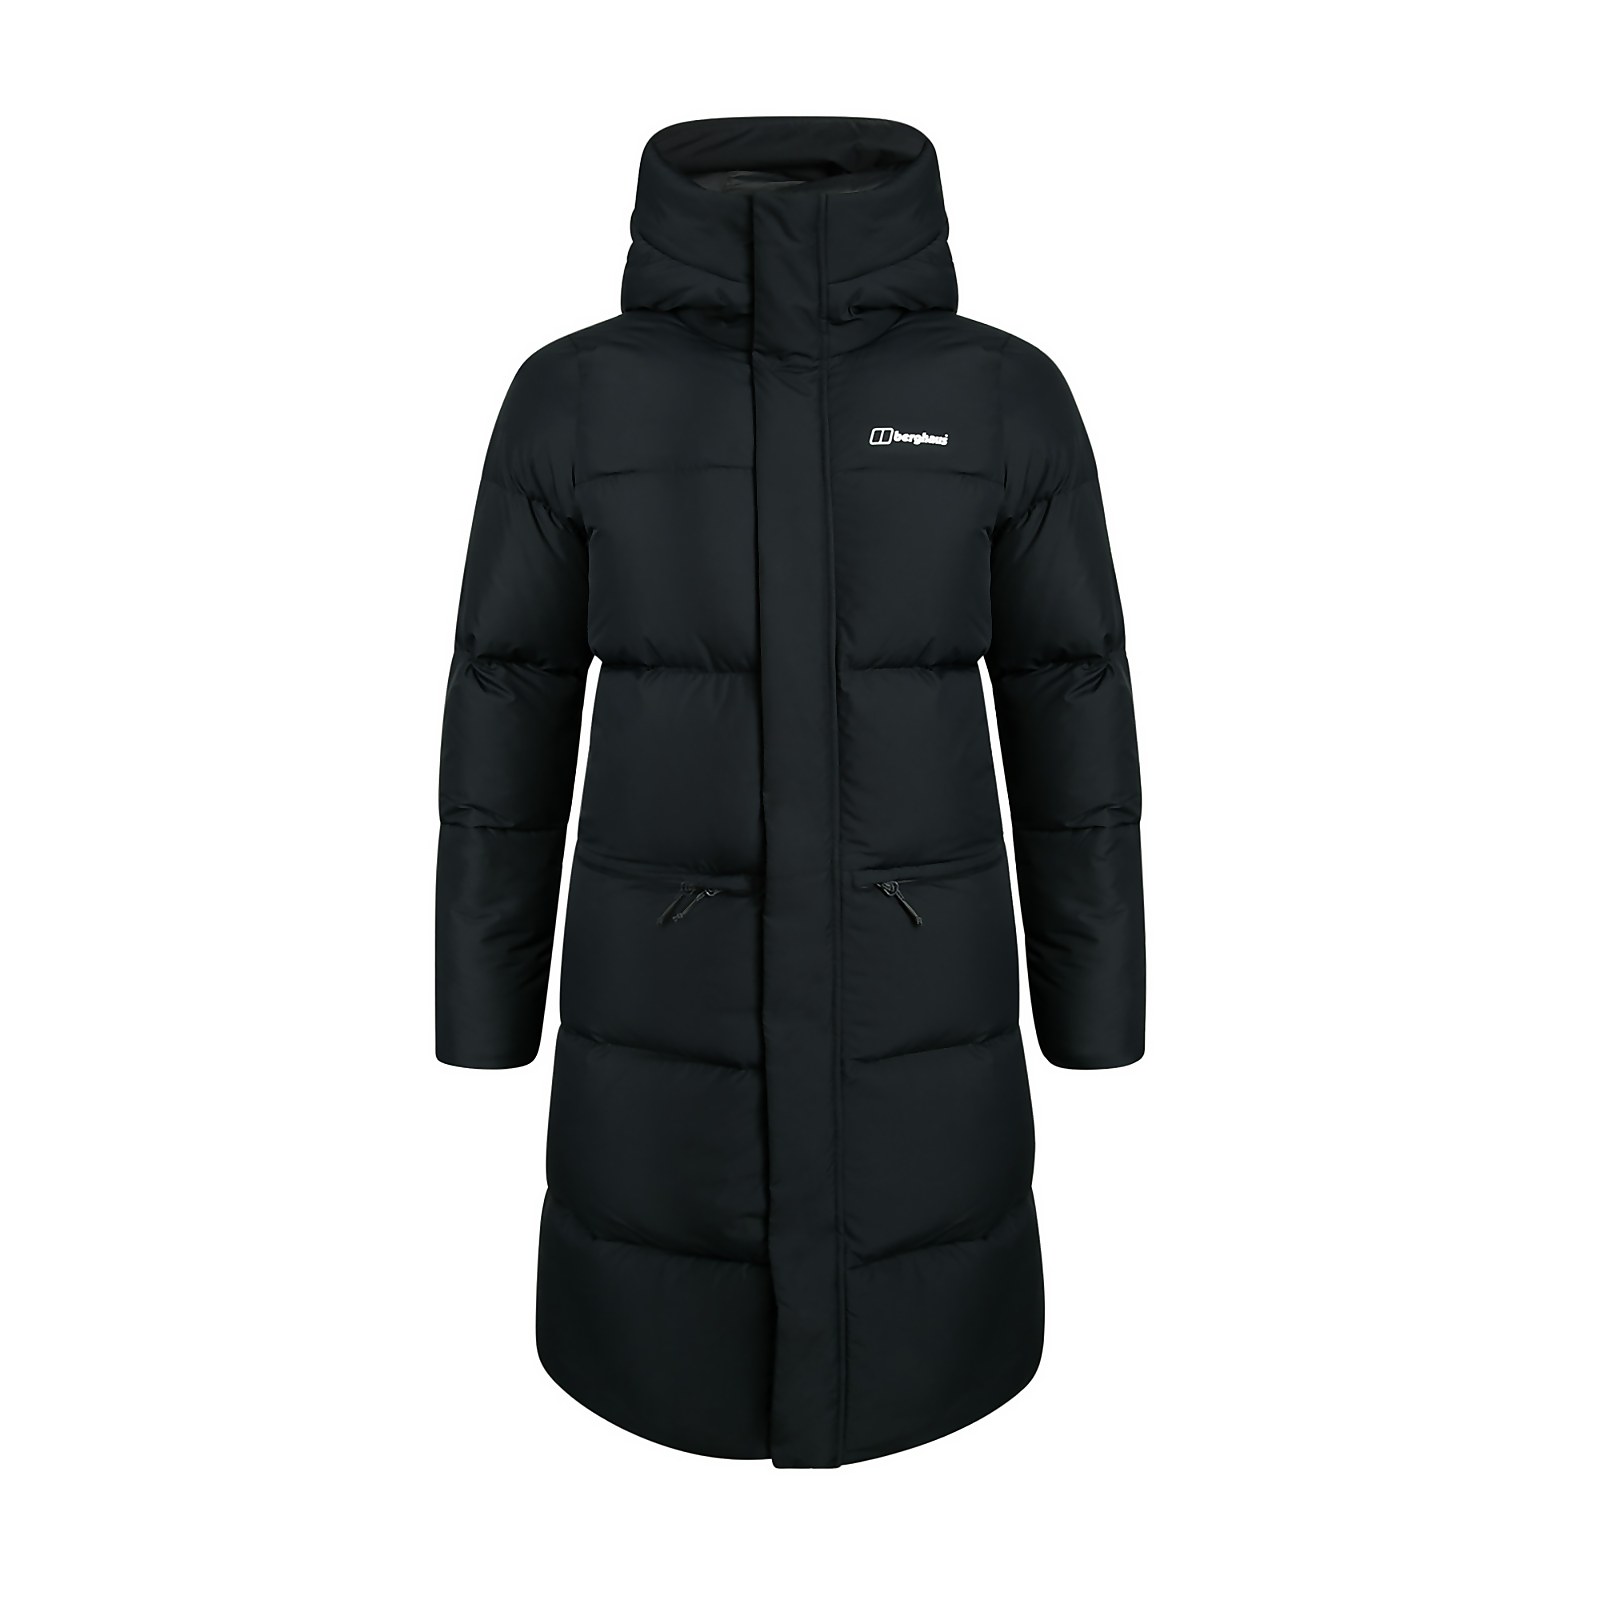 Berghaus Womens Combust Reflect Long Down Insulated Jacket - Black - 14